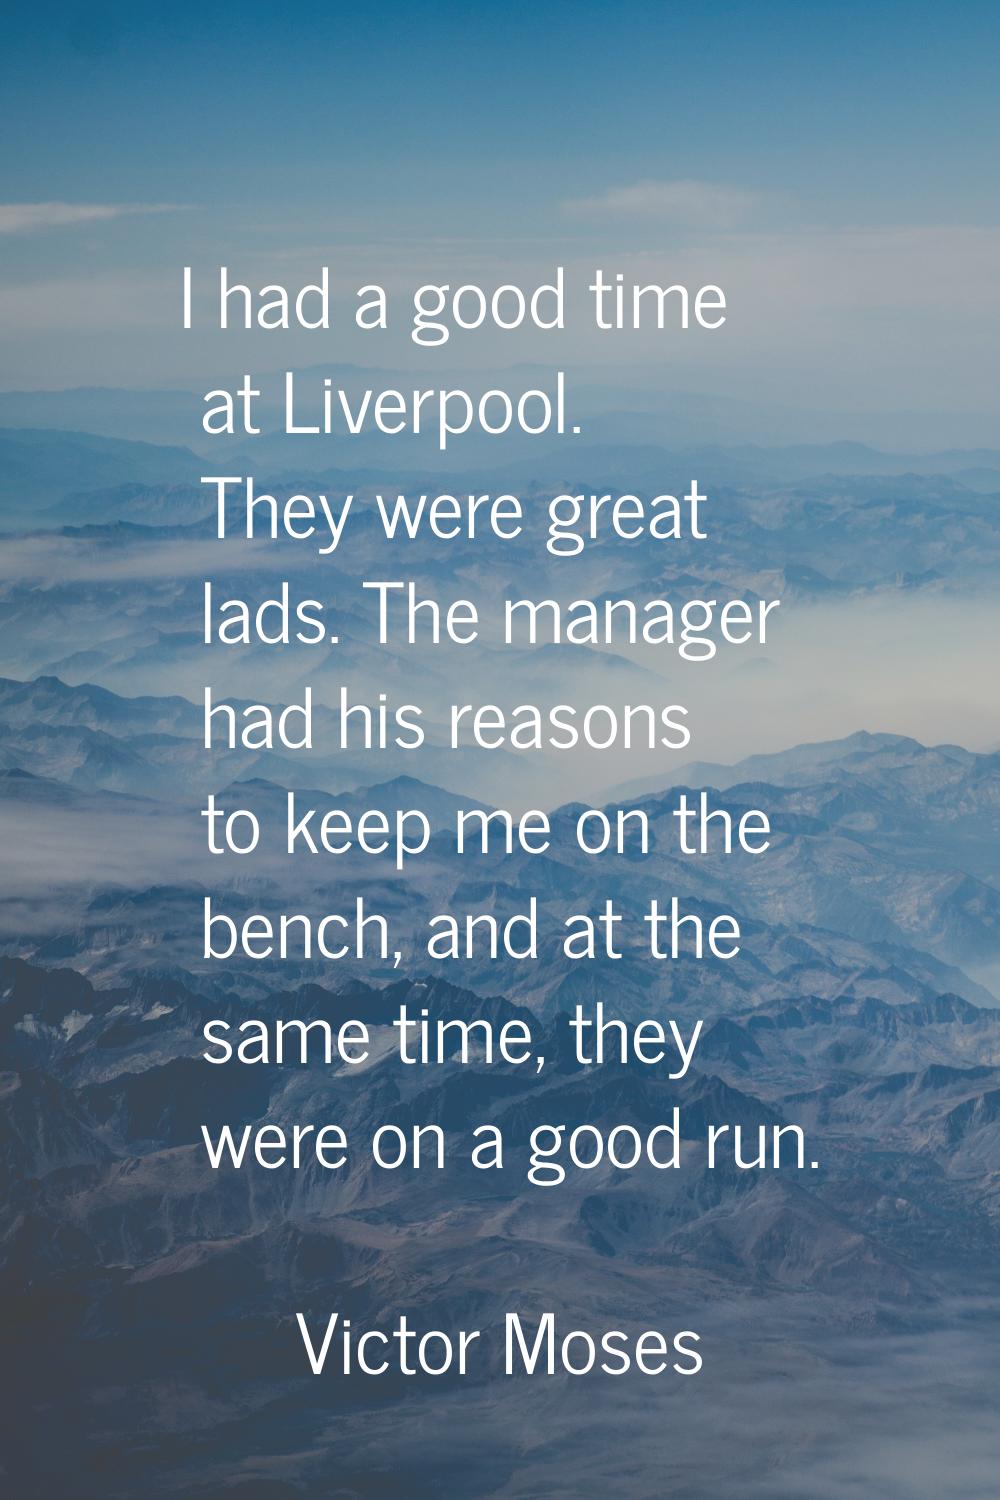 I had a good time at Liverpool. They were great lads. The manager had his reasons to keep me on the